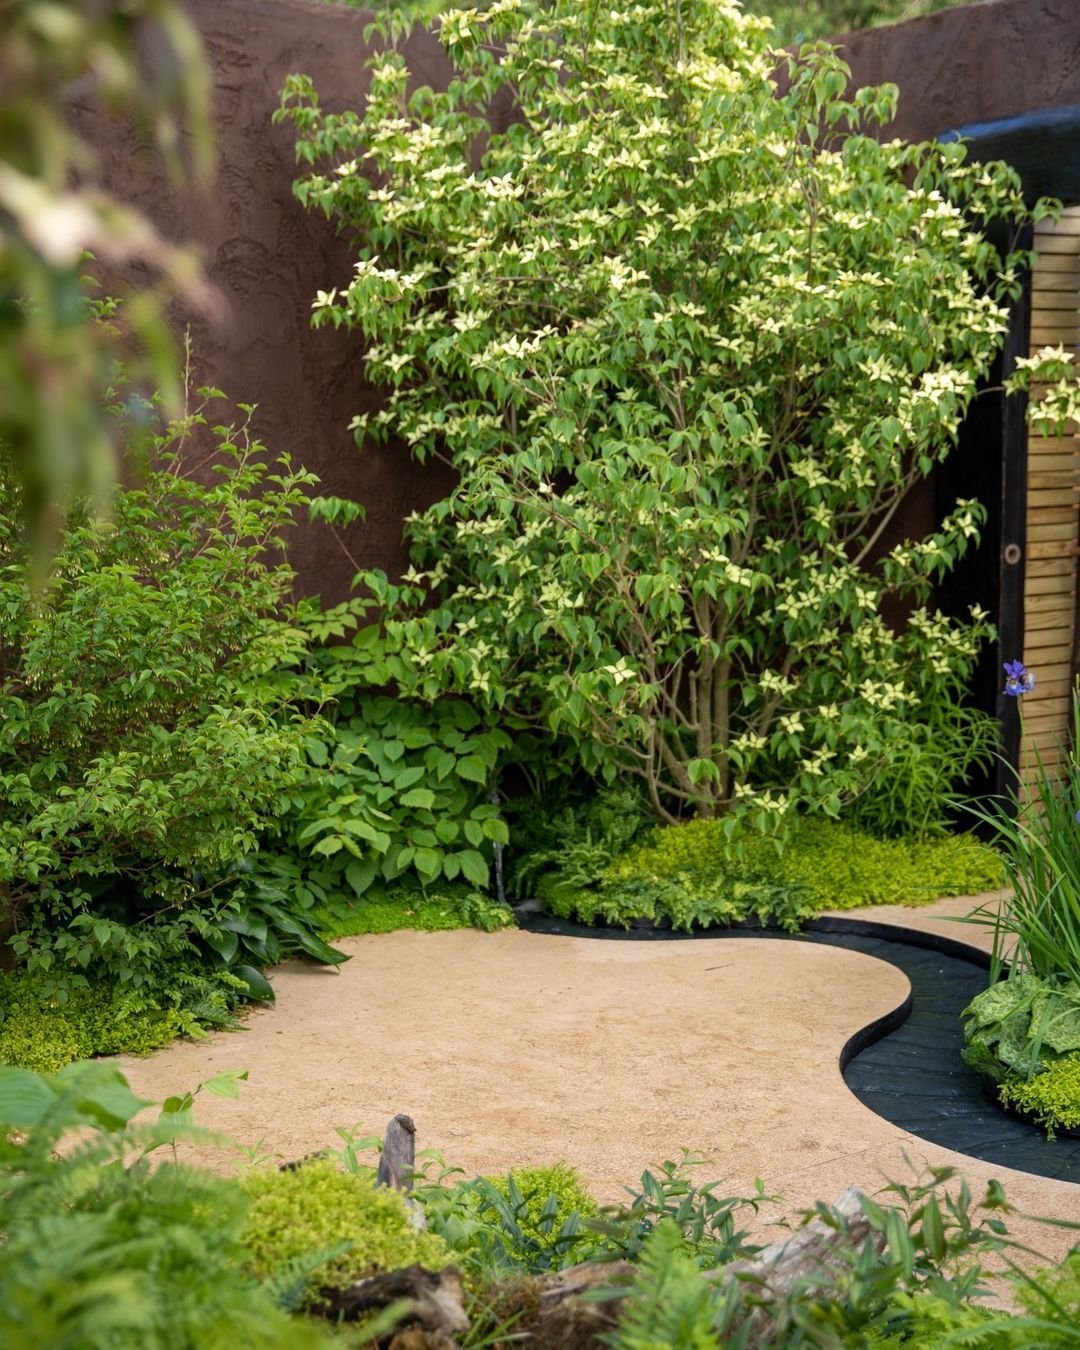 Throwback to the @boodles Travel Garden from Chelsea Flower Show 2022, designed by @tomhoblyn

From the initial plans and ideas to the final result, check out the journey of this incredible garden.

Allgreen. Master In Stone.

#RHS #Chesleaflowershow